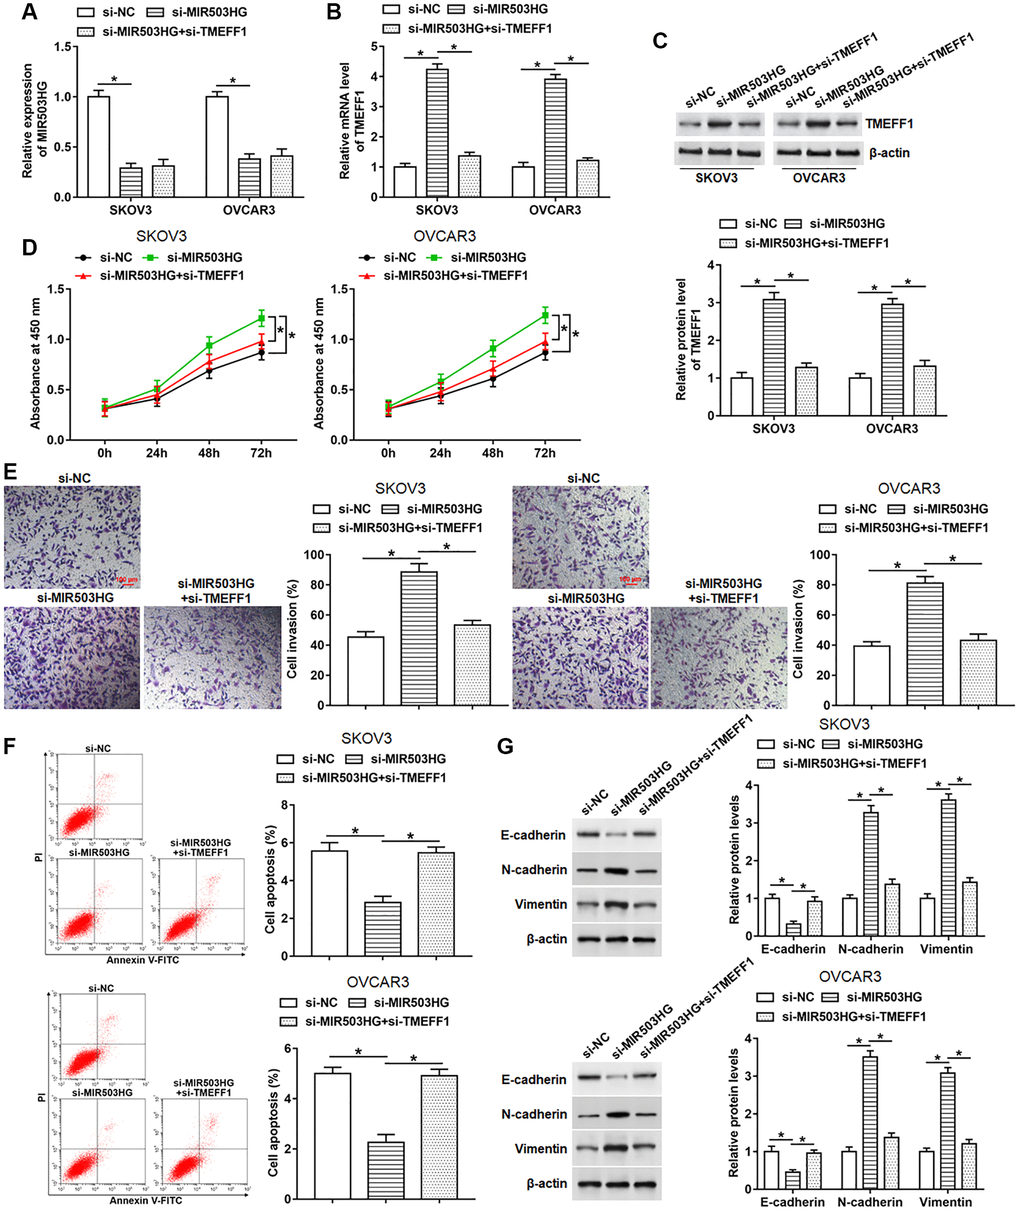 Silencing TMEFF1 reversed the promotion effect of MIR503HG knockdown on malignant behaviors of ovarian cancer cells. MIR503HG siRNA was transfected into SKOV3 and OVCAR3 cells alone or together with TMEFF1 siRNA, after transfection for 48 h, (A) the expression of MIR503HG was measured. (B, C) The mRNA and protein levels of TMEFF1 were detected with RT-qPCR and Western blotting. (D, E) CCK-8 and Transwell assays were performed to measure cell proliferation and invasion. (F) Flow cytometry was carried out to evaluate cell apoptosis. (G) The expression of E-cadherin, N-cadherin and Vimentin was analyzed. *P n = 6 in each group. Each test was repeated at least three times independently.